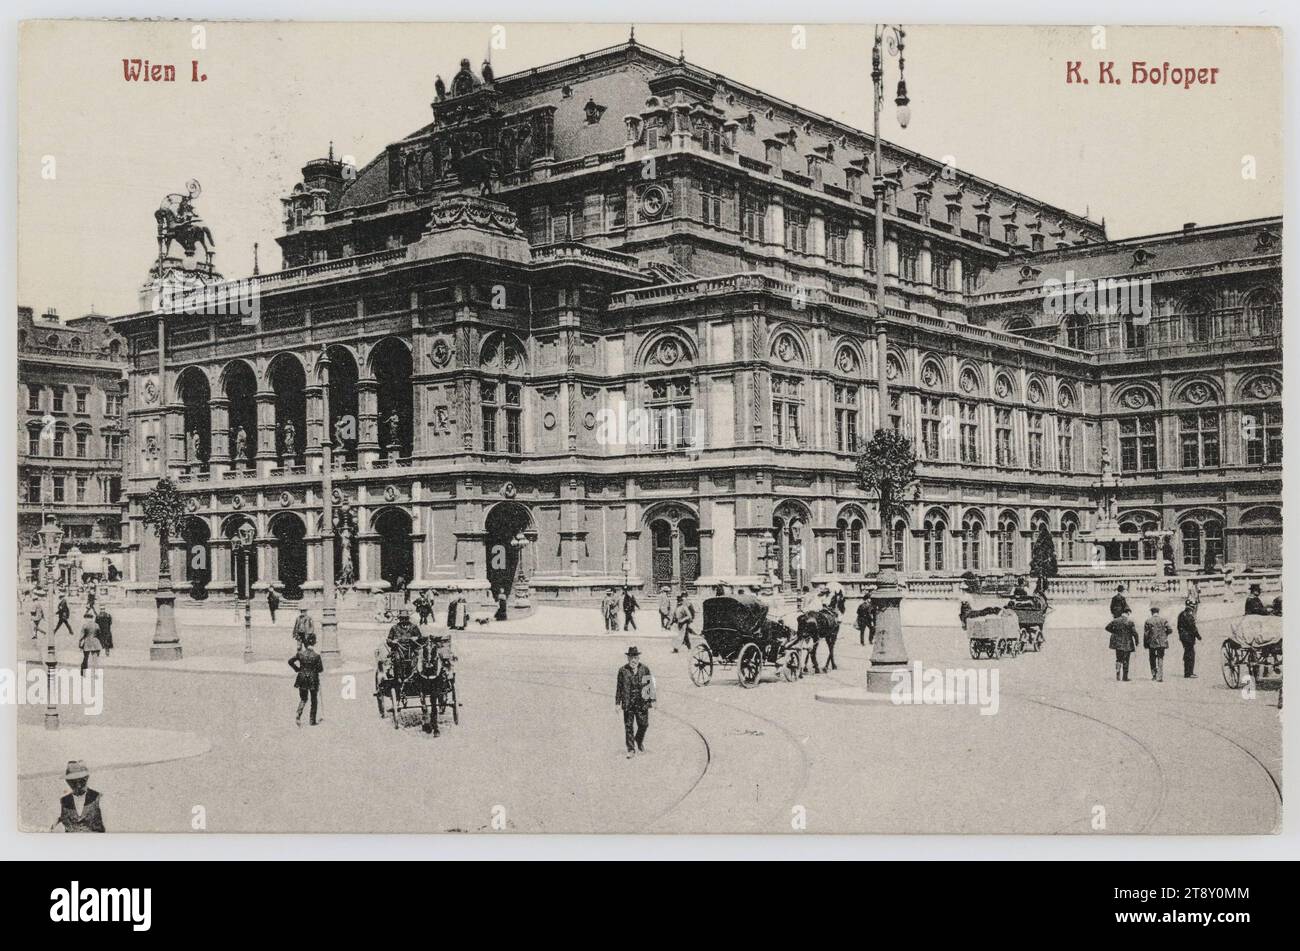 Vienna I. K.K. Hofoper, Khegam Amatouny (A. W.?) (1877-1948), Producer, 1910, paperboard, Collotype, Inscription, FROM, wien, TO, Wien, ADDRESS, Hochwohlgeboren, Marokkanergasse. 19th, Vienna. III, 3rd, MESSAGE, 20.II.10., Madam, It will be a great pleasure for me to avail myself of your kind invitation for next Wednesday, With the greatest respect, [signature], Music, Theatre, Attractions, Ringstrasse, Media and Communication, Postcards with transliteration, 1st District: Innere Stadt, opera house, street lighting, with people, four-wheeled, animal-drawn vehicle, e.g.: cab, carriage, coach Stock Photo